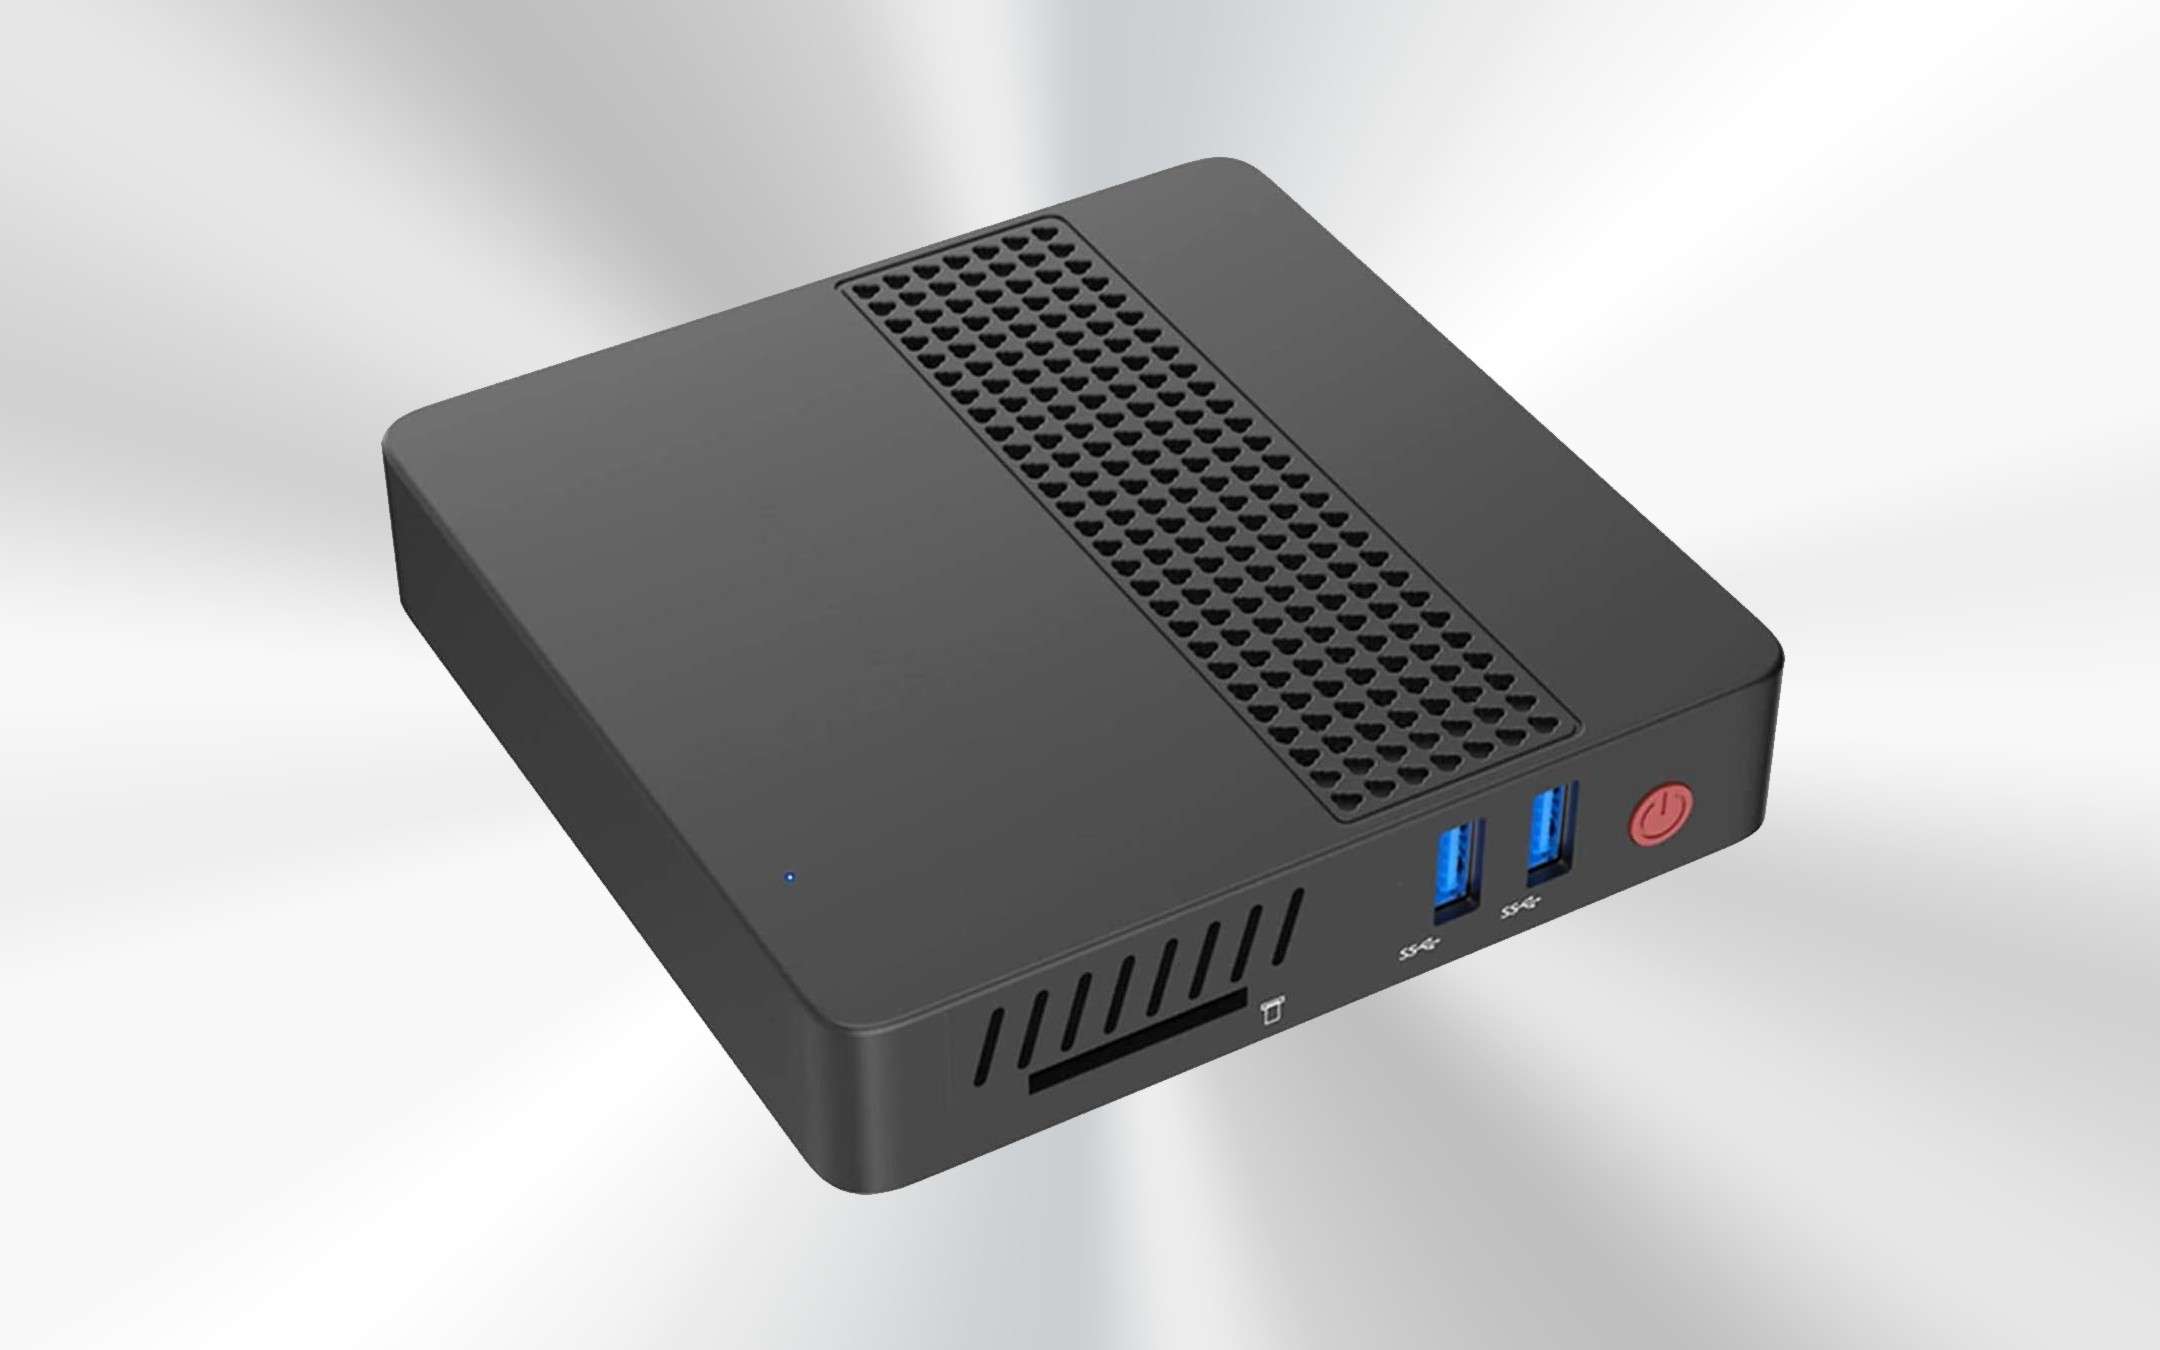 Mini PC: in 150 euros there is everything you need